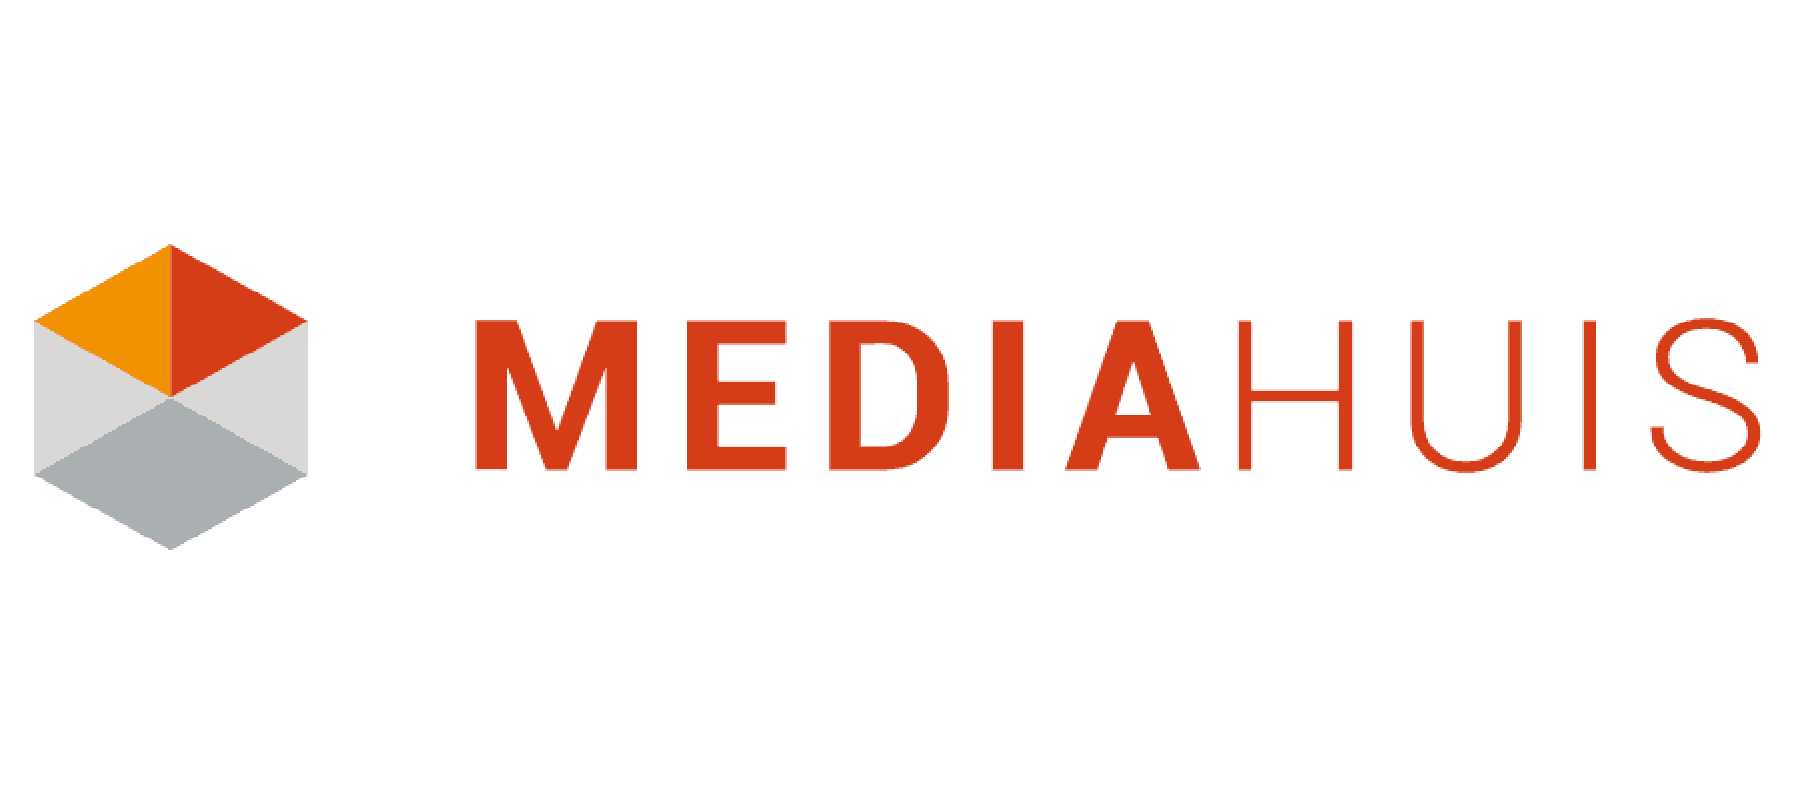 Mediahuis strengthens position in HR technology market with investment in Settly